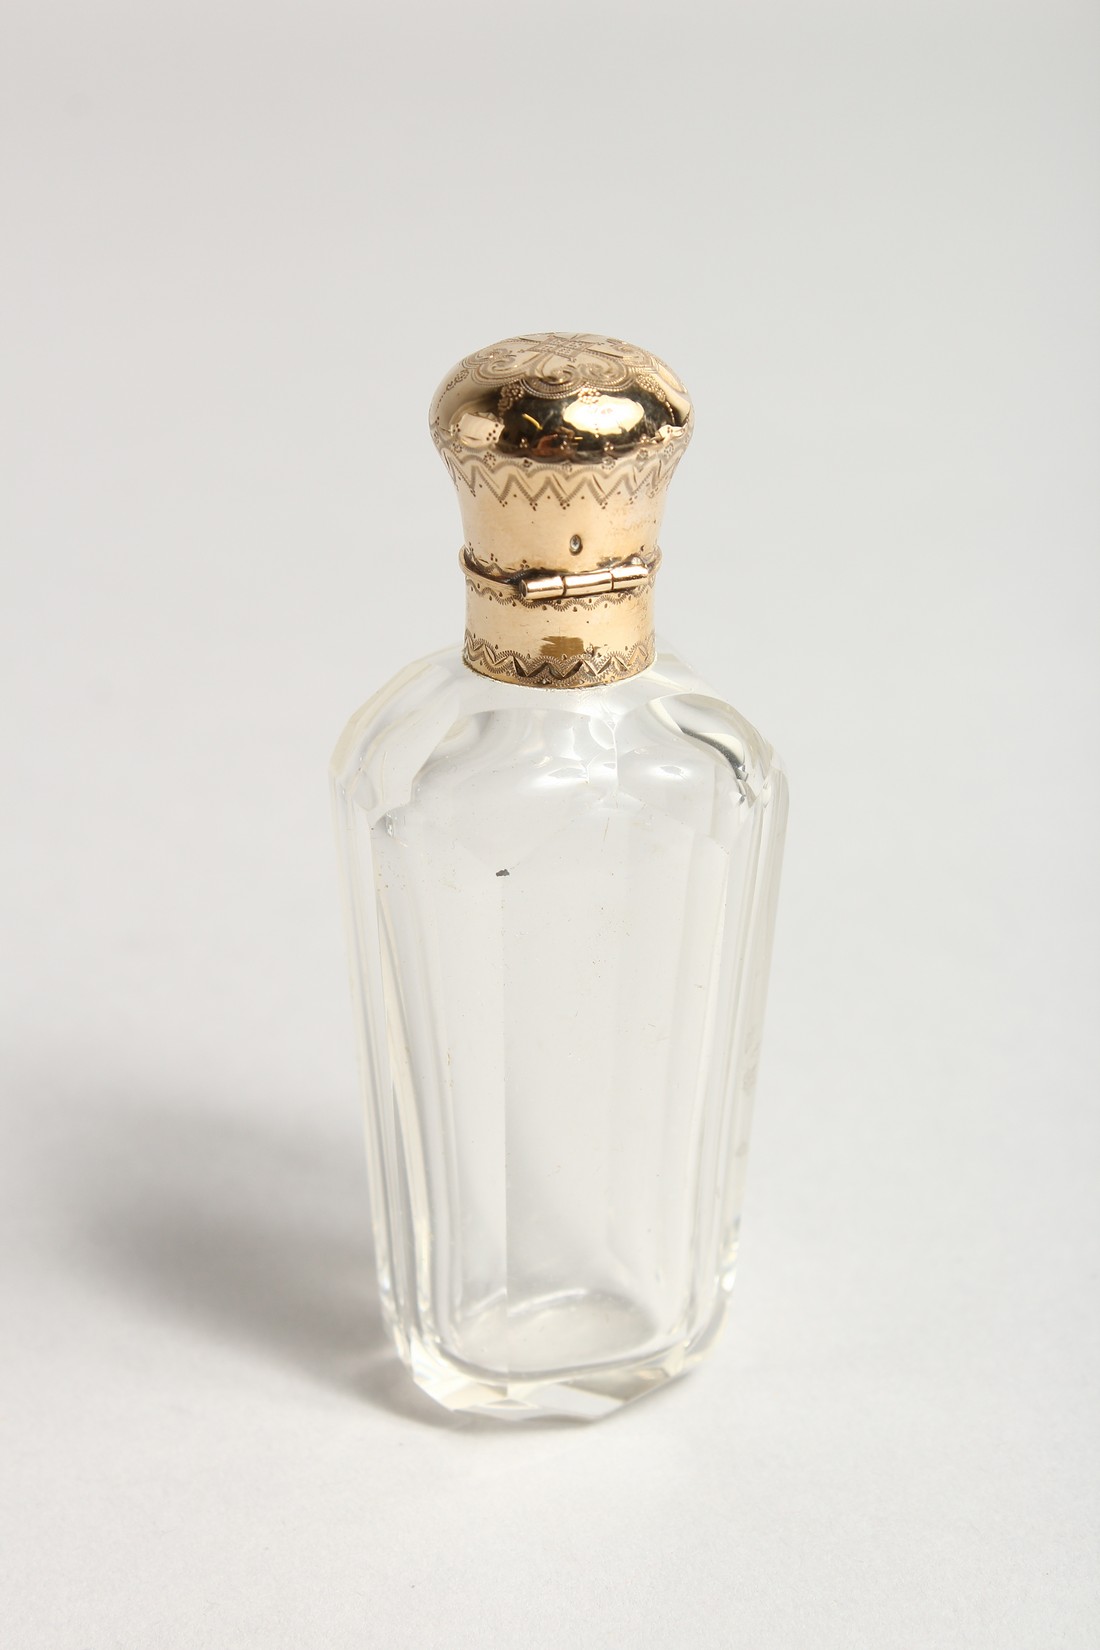 A TAPERING GLASS TOP SCENT BOTTLE 3.5ins long. - Image 2 of 4